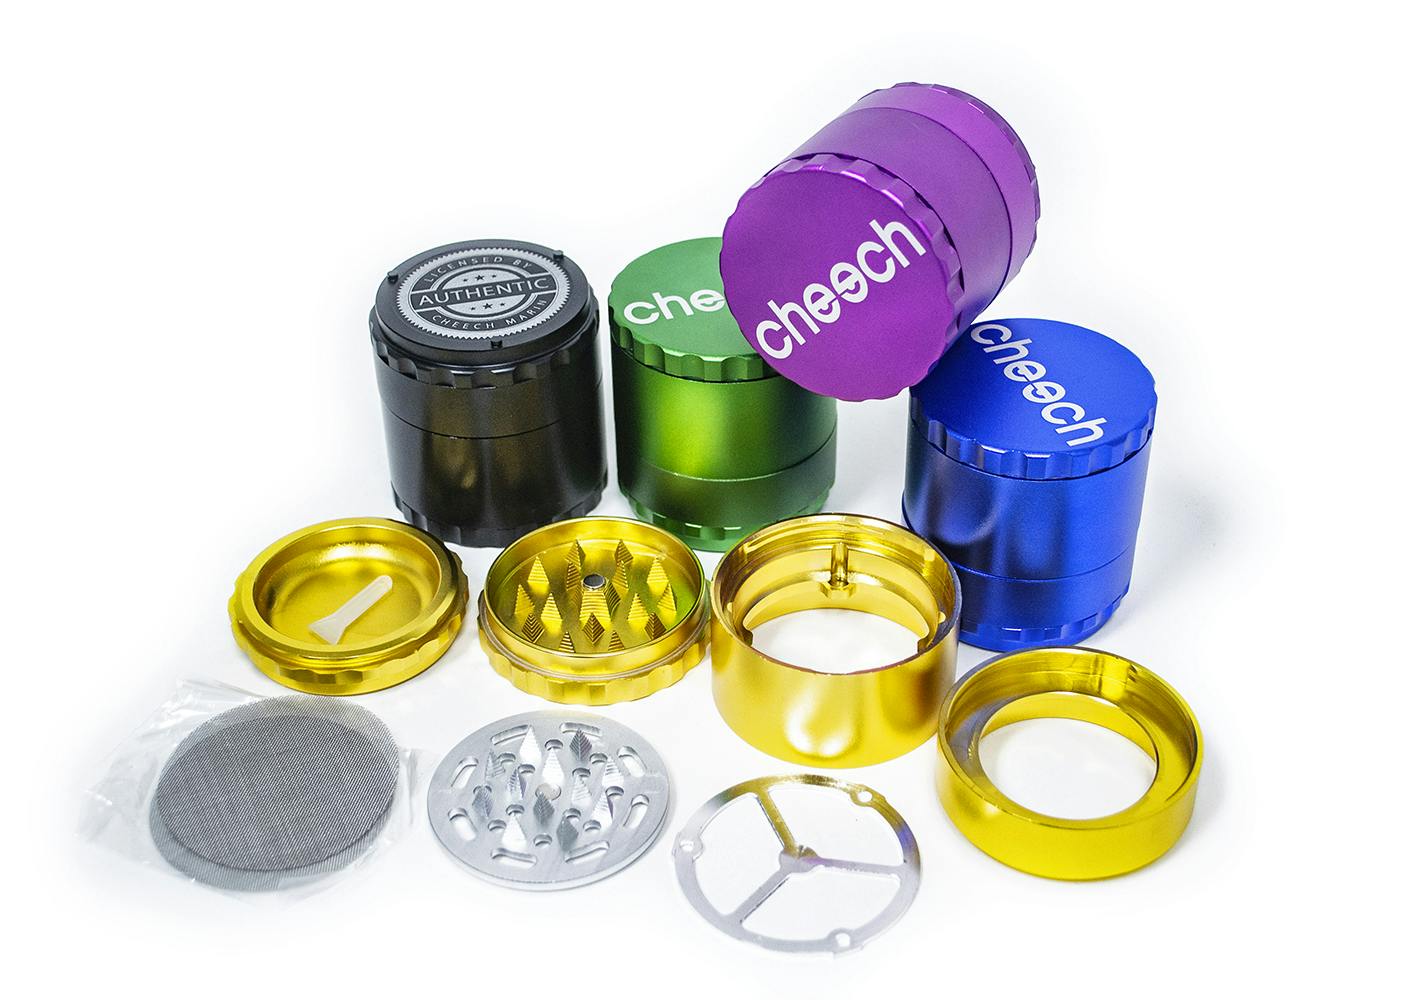 Cheech | 63mm 4pc Grinder w/ Removable Teeth & Screen - Assorted Colours #1005